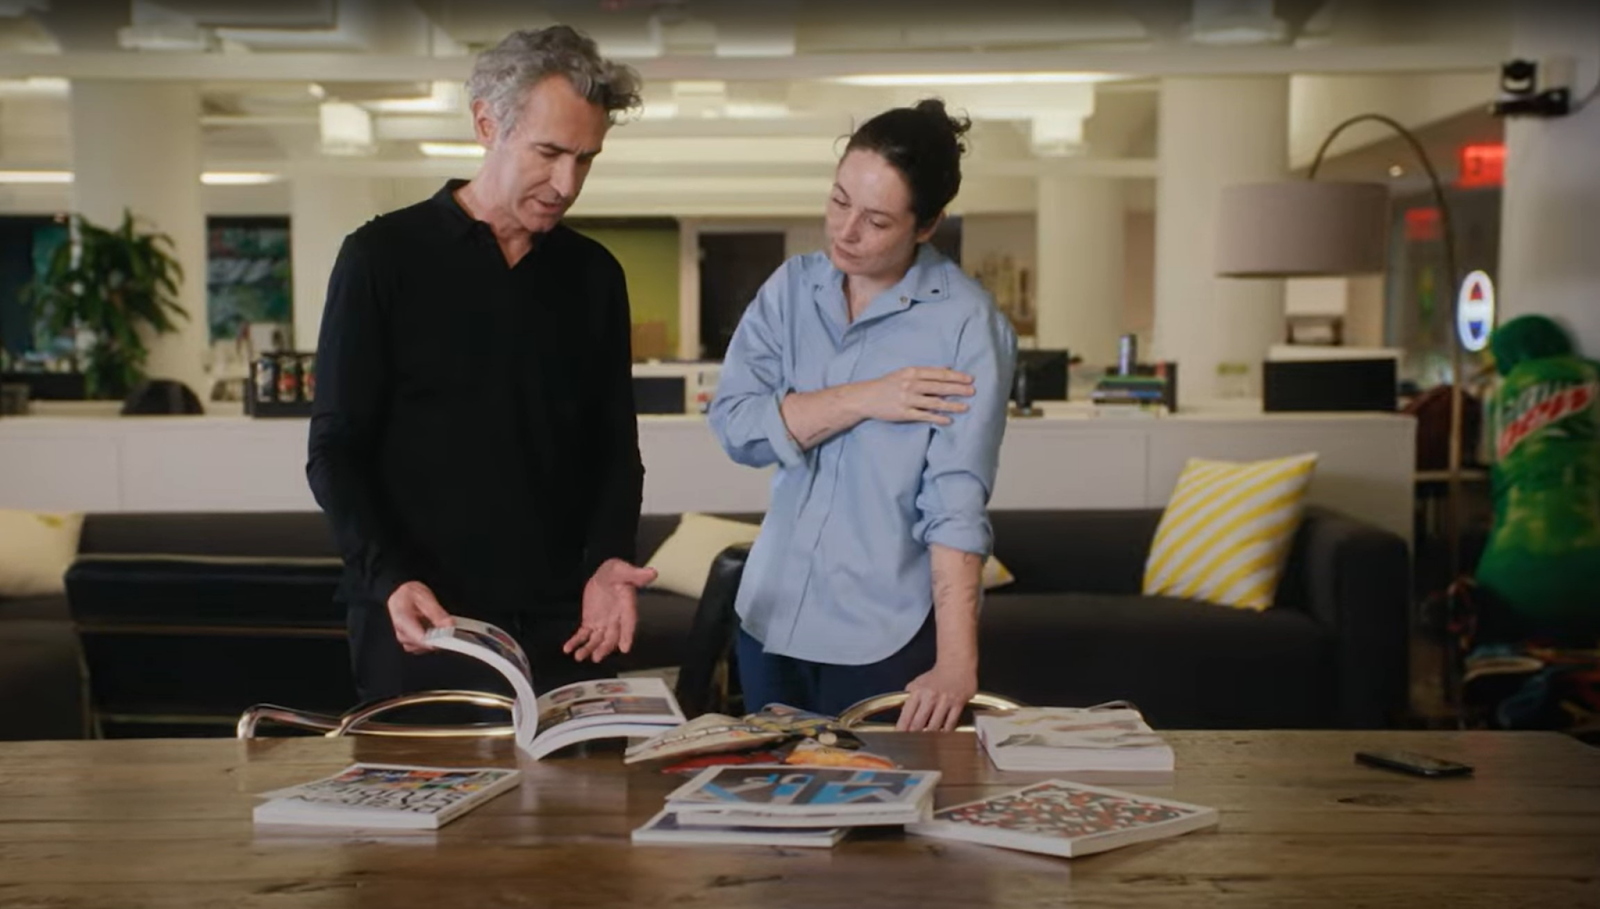 Two PepsiCo colleagues chat while looking at a design book together.